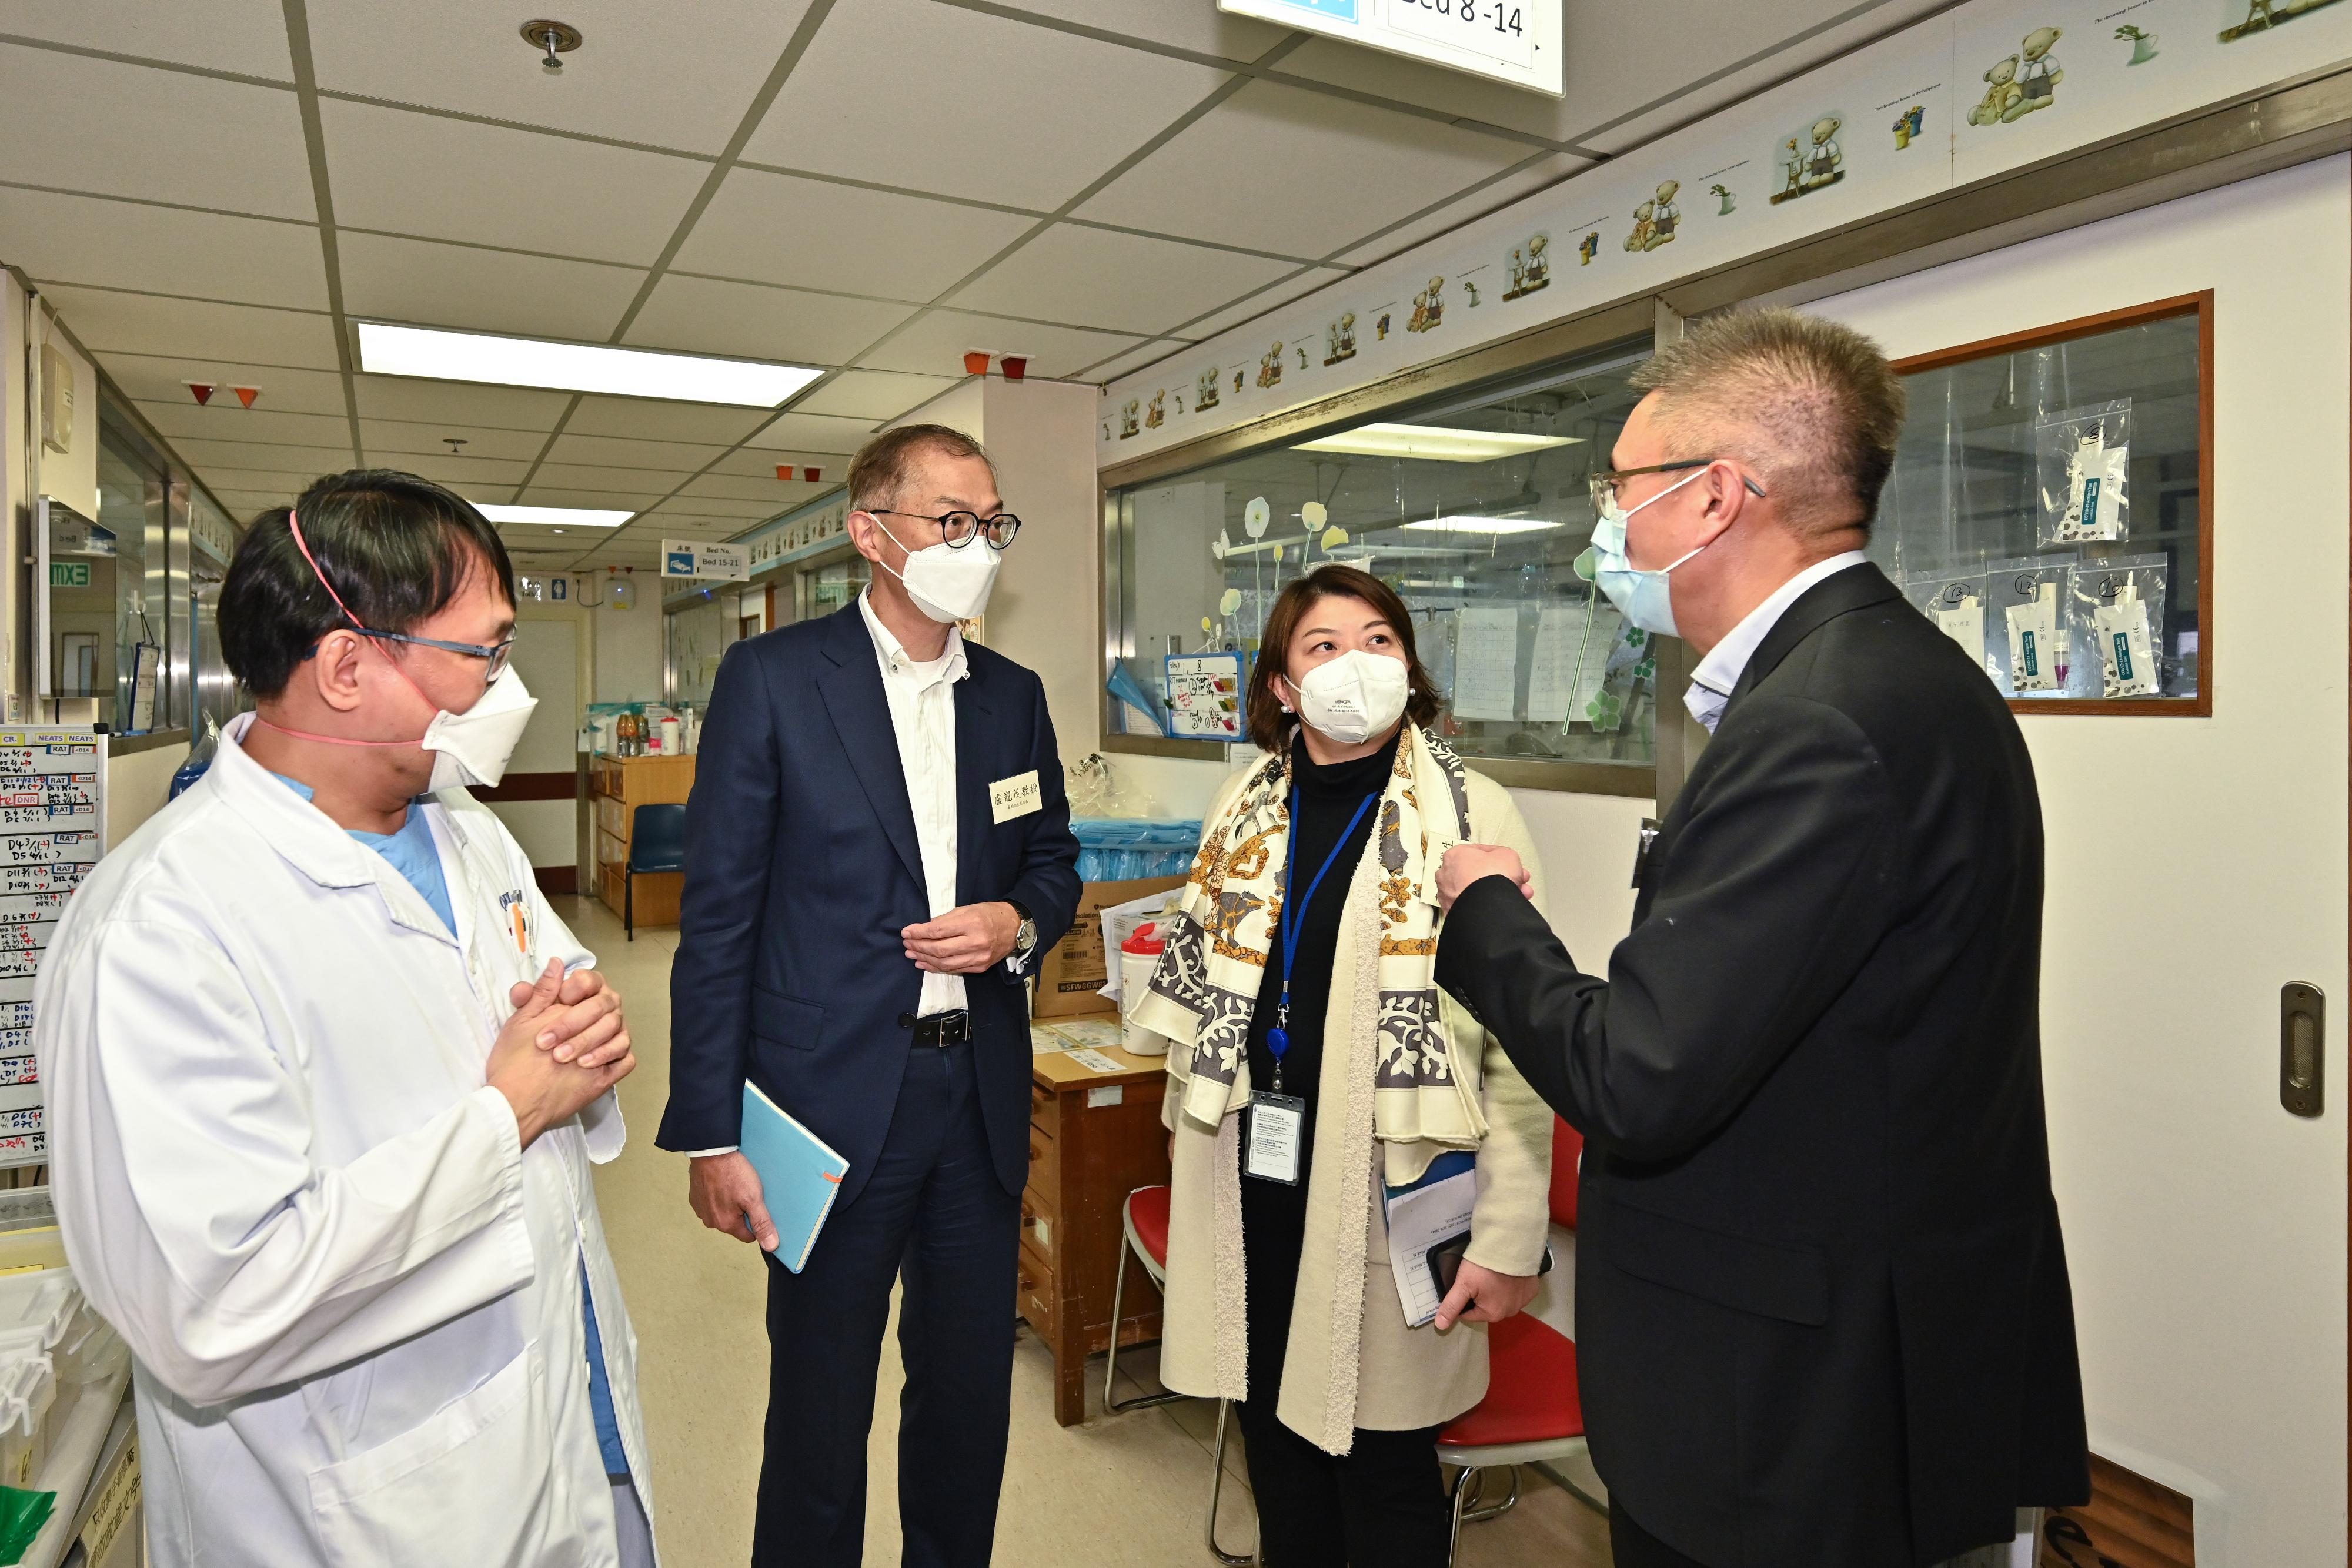 The Secretary for Health, Professor Lo Chung-mau (second left), and the Under Secretary for Health, Dr Libby Lee (second right), visited Queen Elizabeth Hospital today (January 3) and learned about the current service situation and deployment of manpower at the hospital from the Cluster Chief Executive of Kowloon Central Cluster of the Hospital Authority, Dr Eric Cheung (first right).